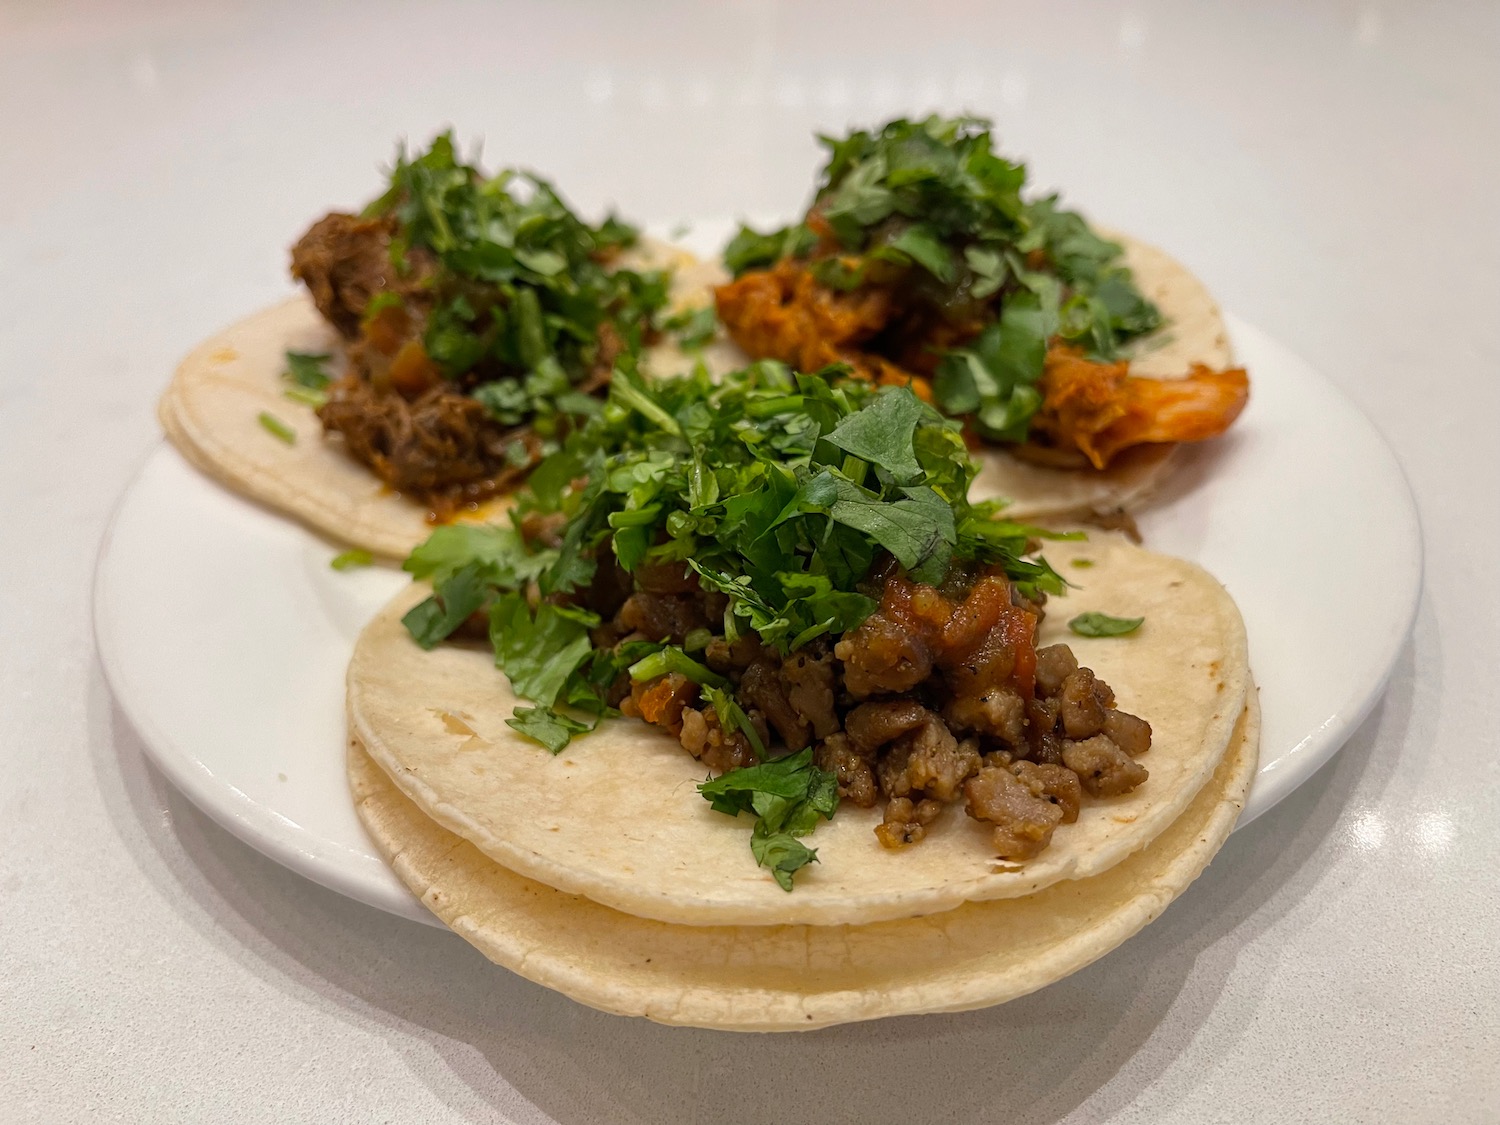 a plate of tacos with meat and greens